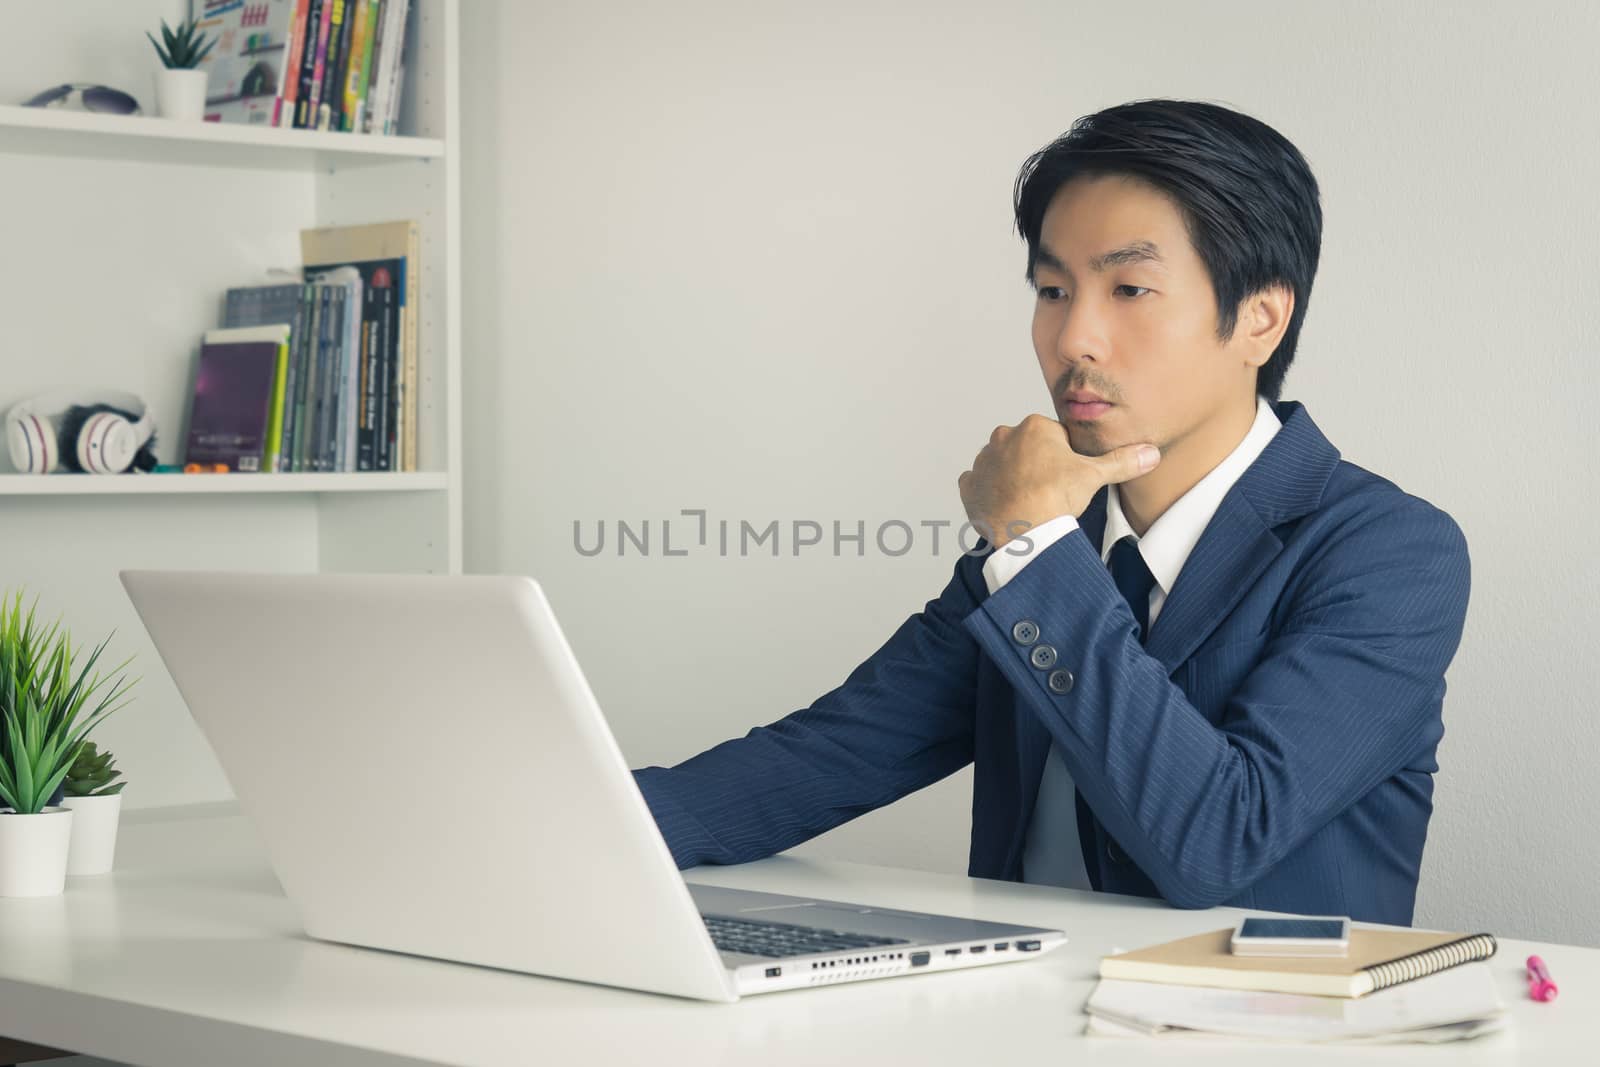 Asian Financial Advisor or Asian Consulting Businessman in Suit Thinking in front of Laptop Monitor in Office. Asian financial advisor or Asian consulting businessman contact with customer